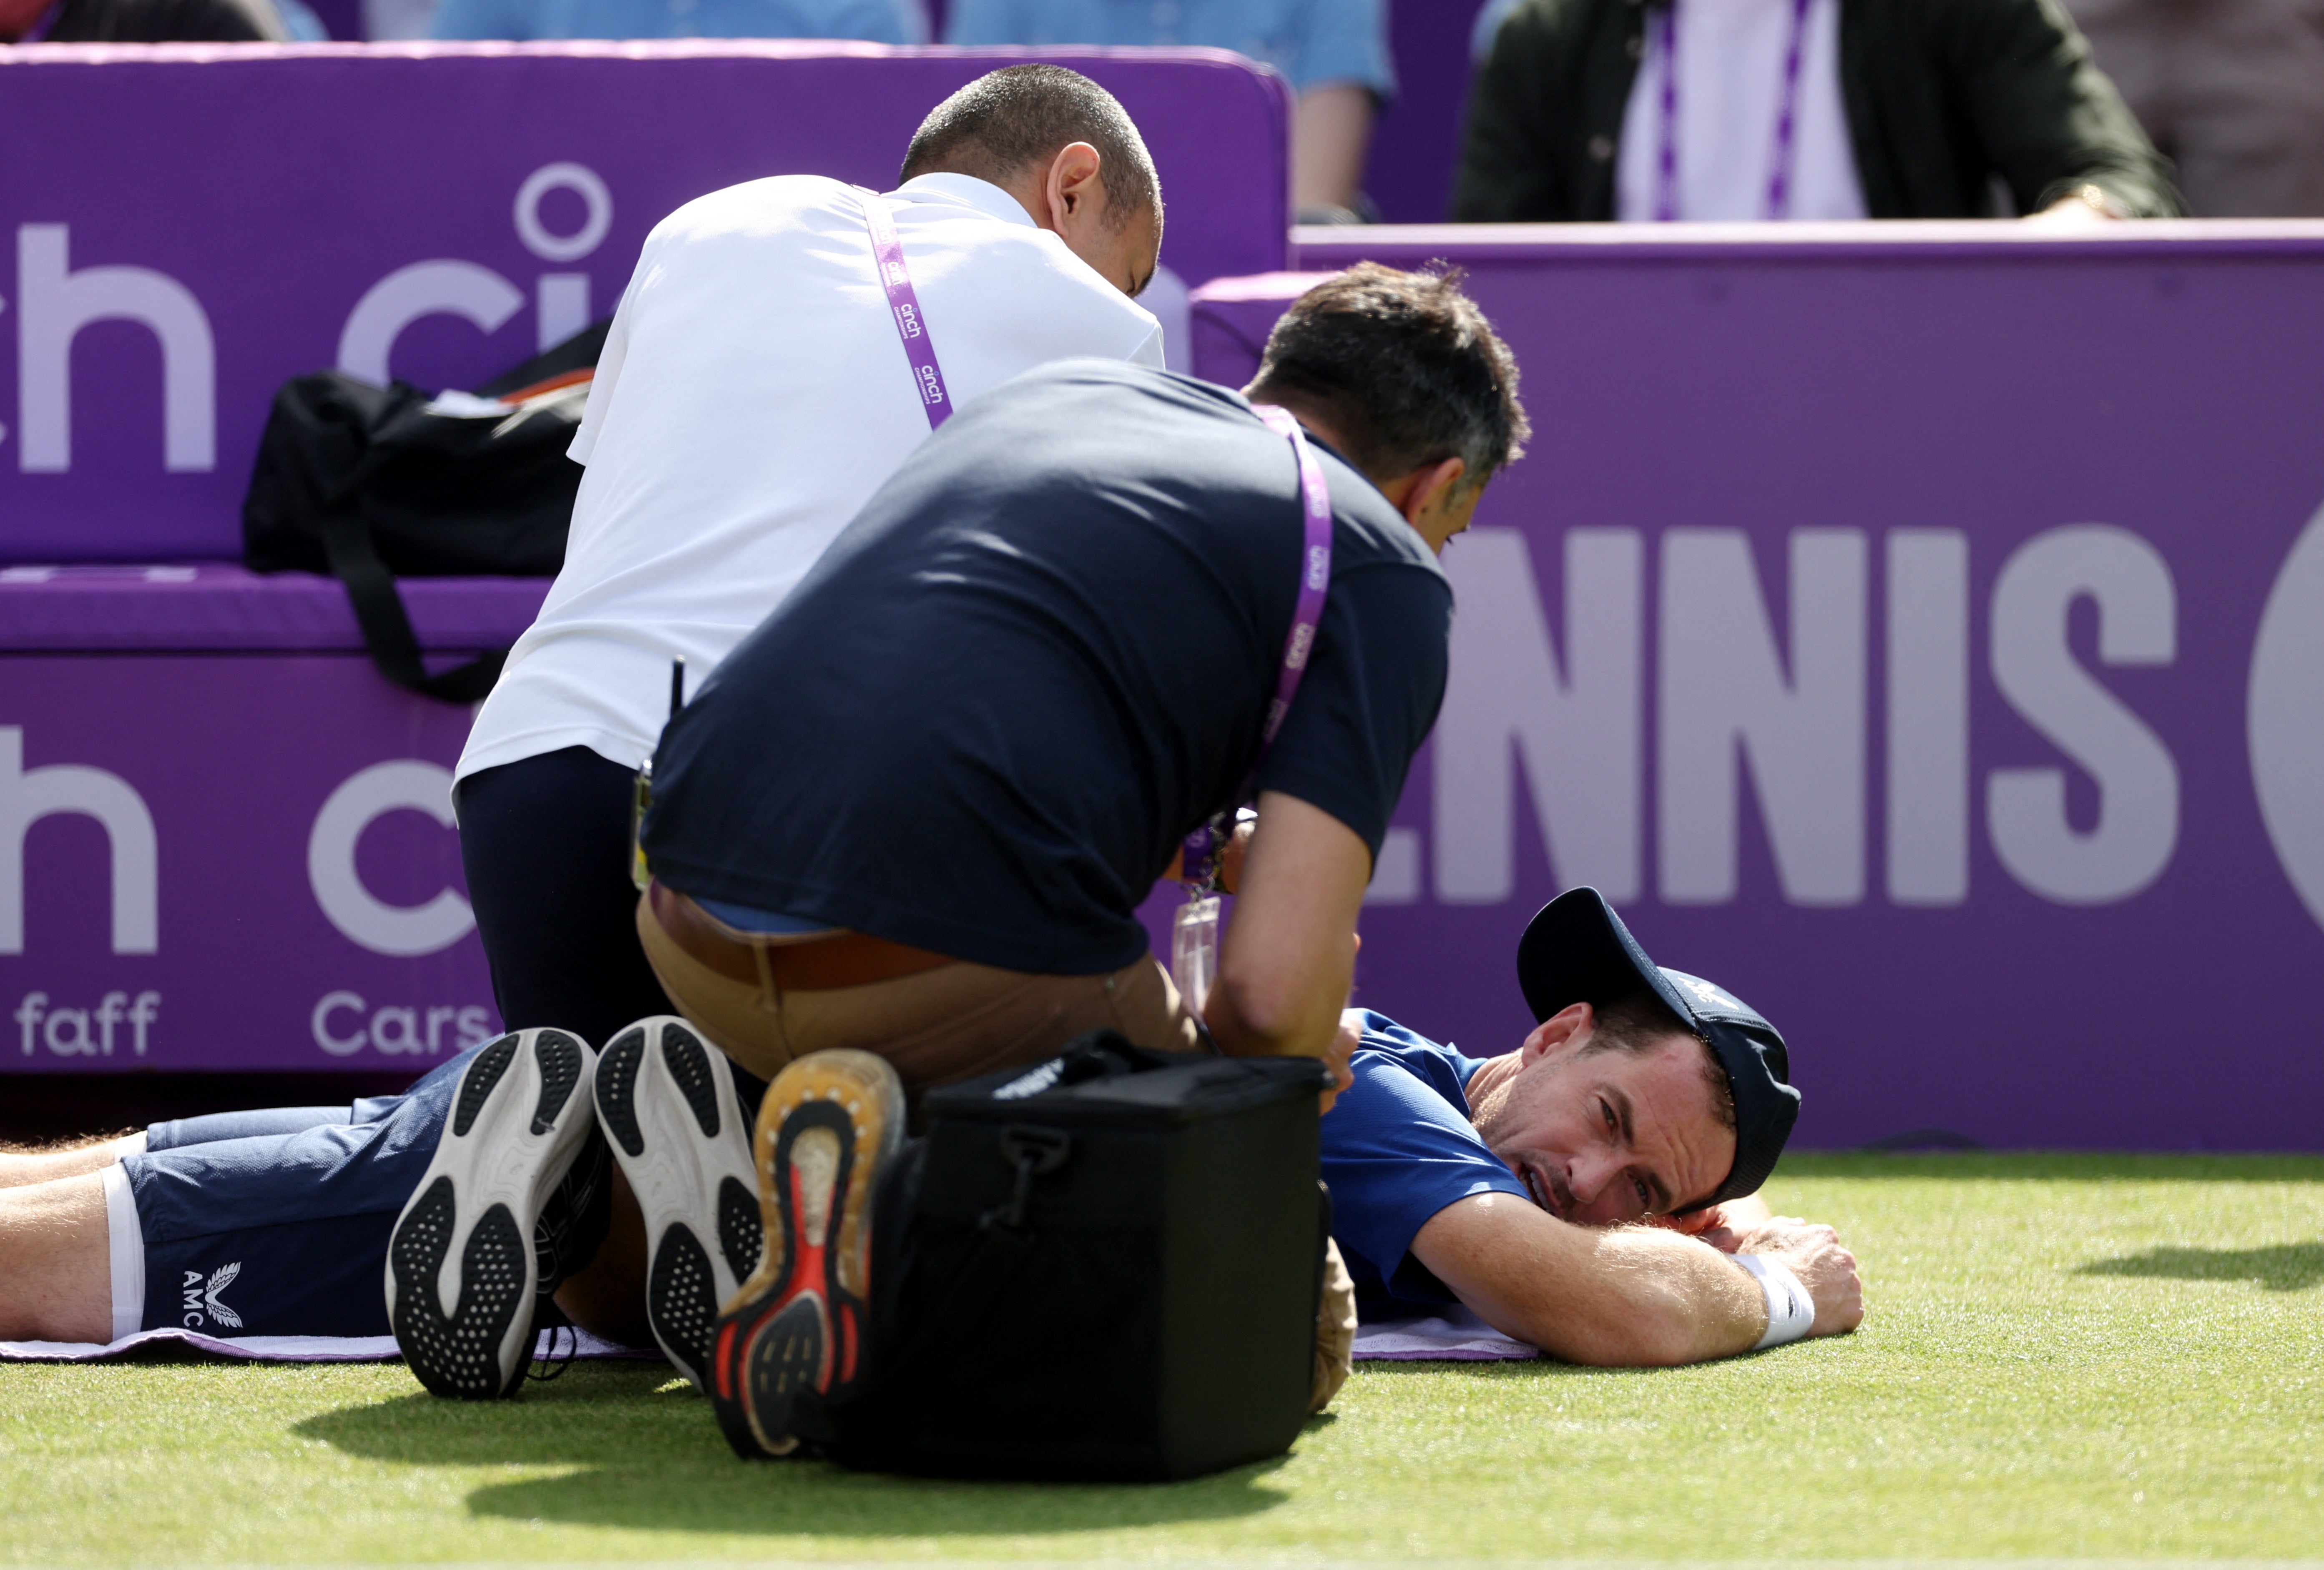 andy murray, wimbledon, queen's club, jordan thompson, andy murray gives update after injury scare casts doubt over final wimbledon